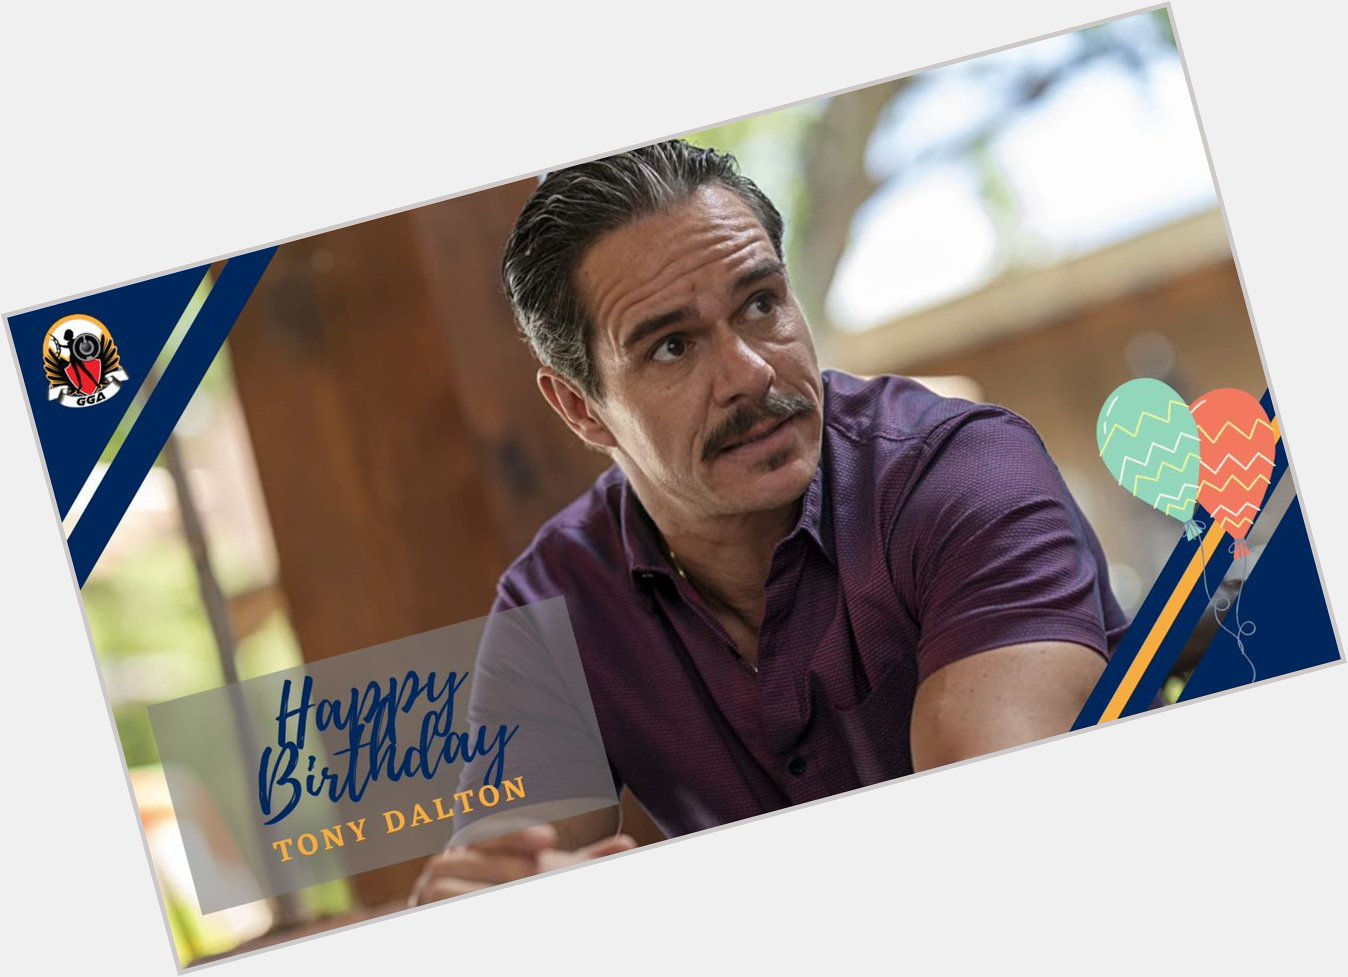 Happy Birthday to Tony Dalton! Which role of his is your favorite? 